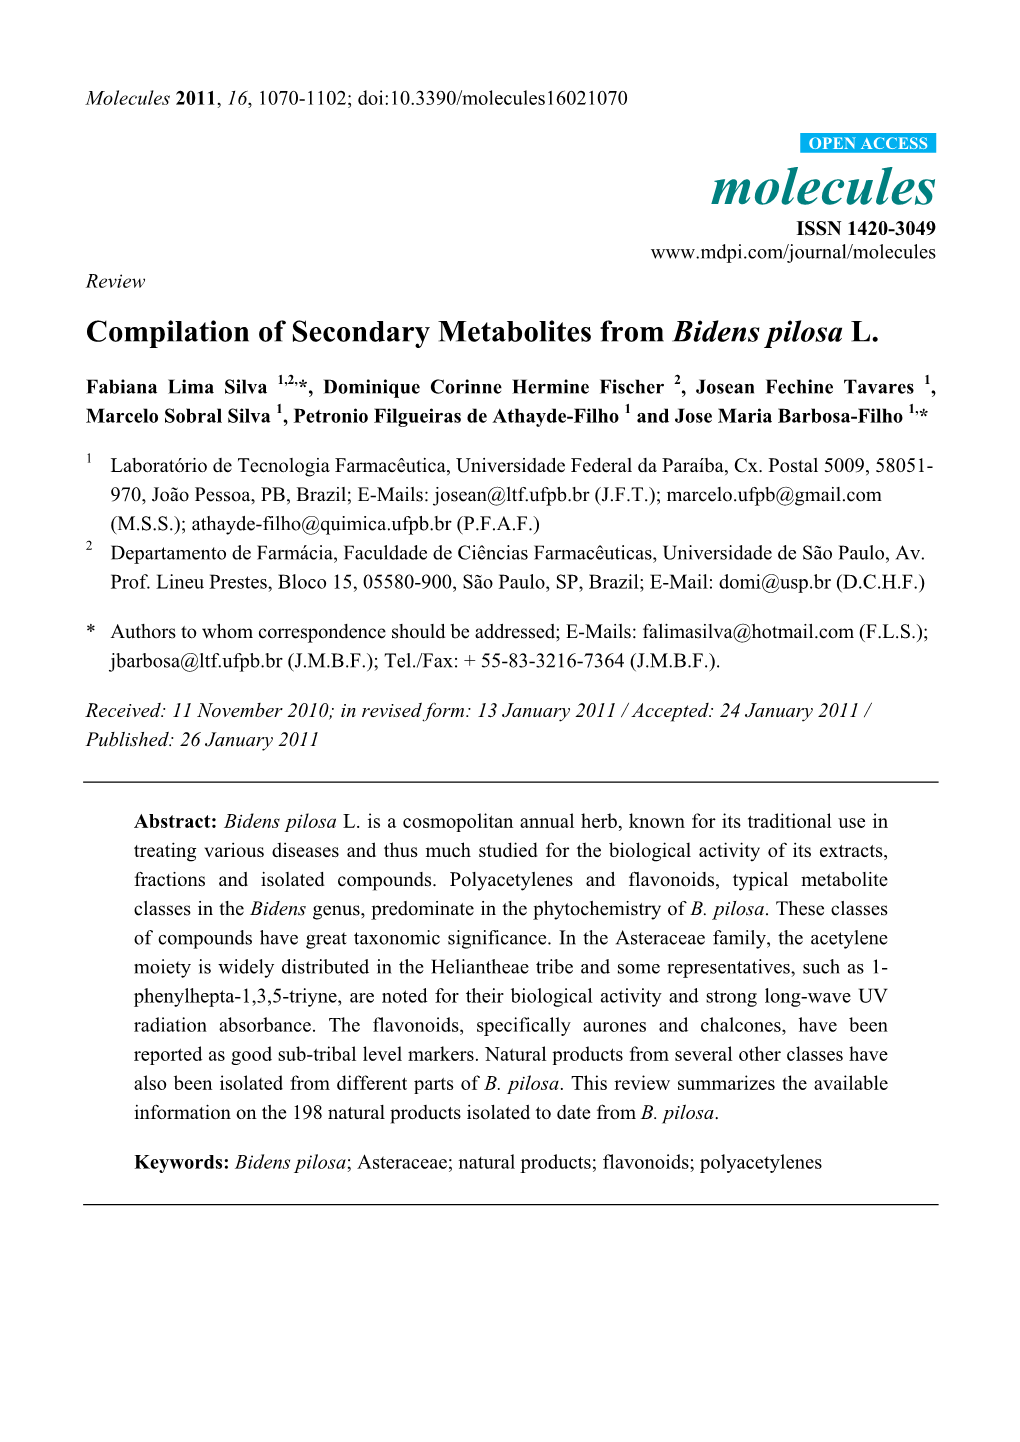 Compilation of Secondary Metabolites from Bidens Pilosa L